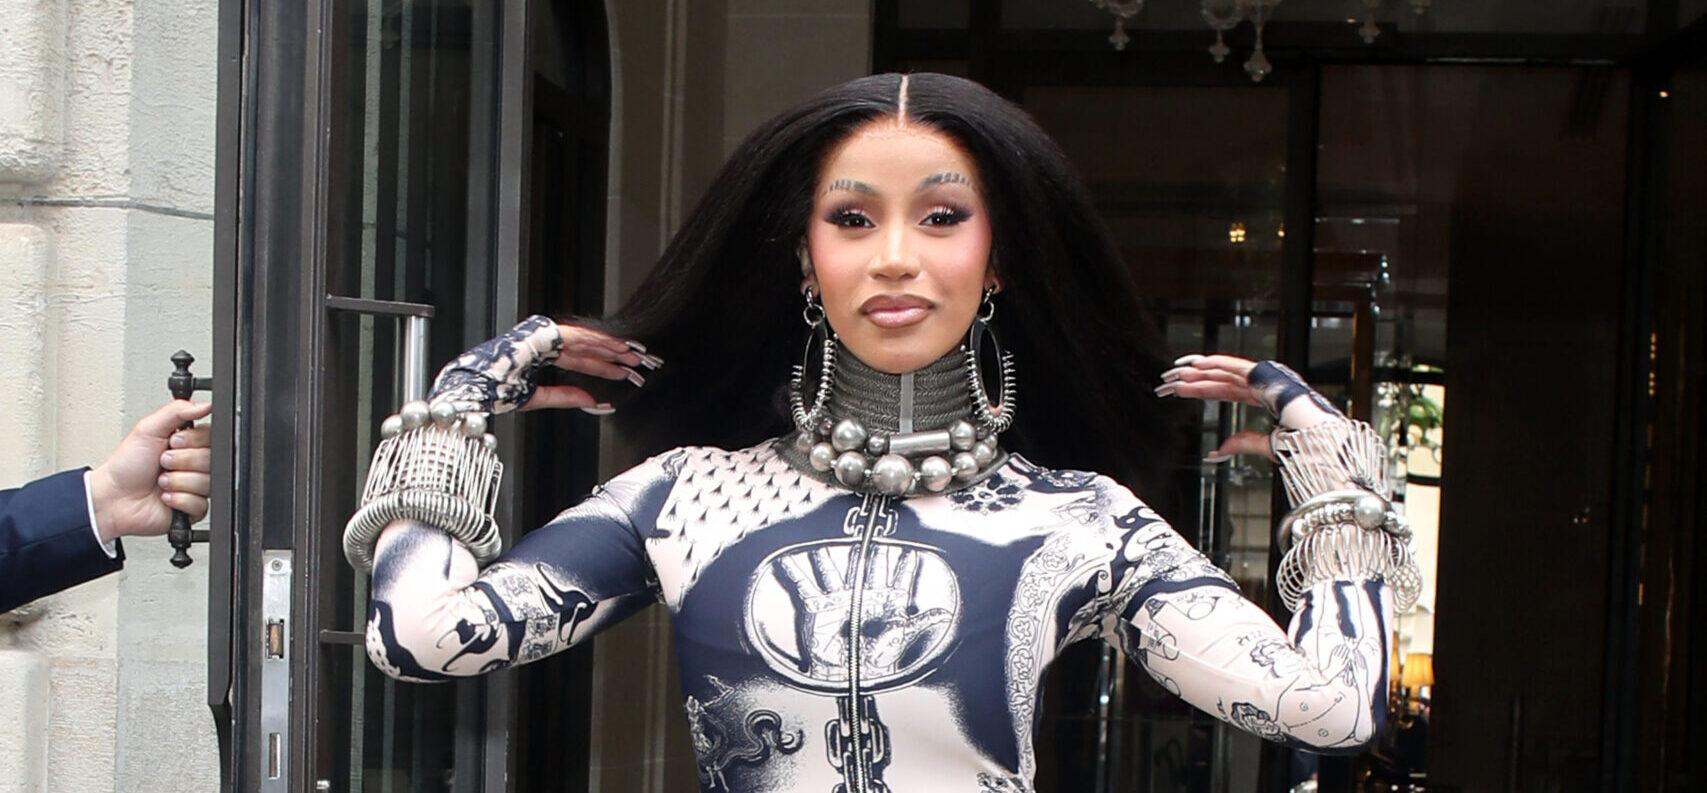 Cardi B's Suffers Wardrobe Malfunction, Gets Helping Hand From